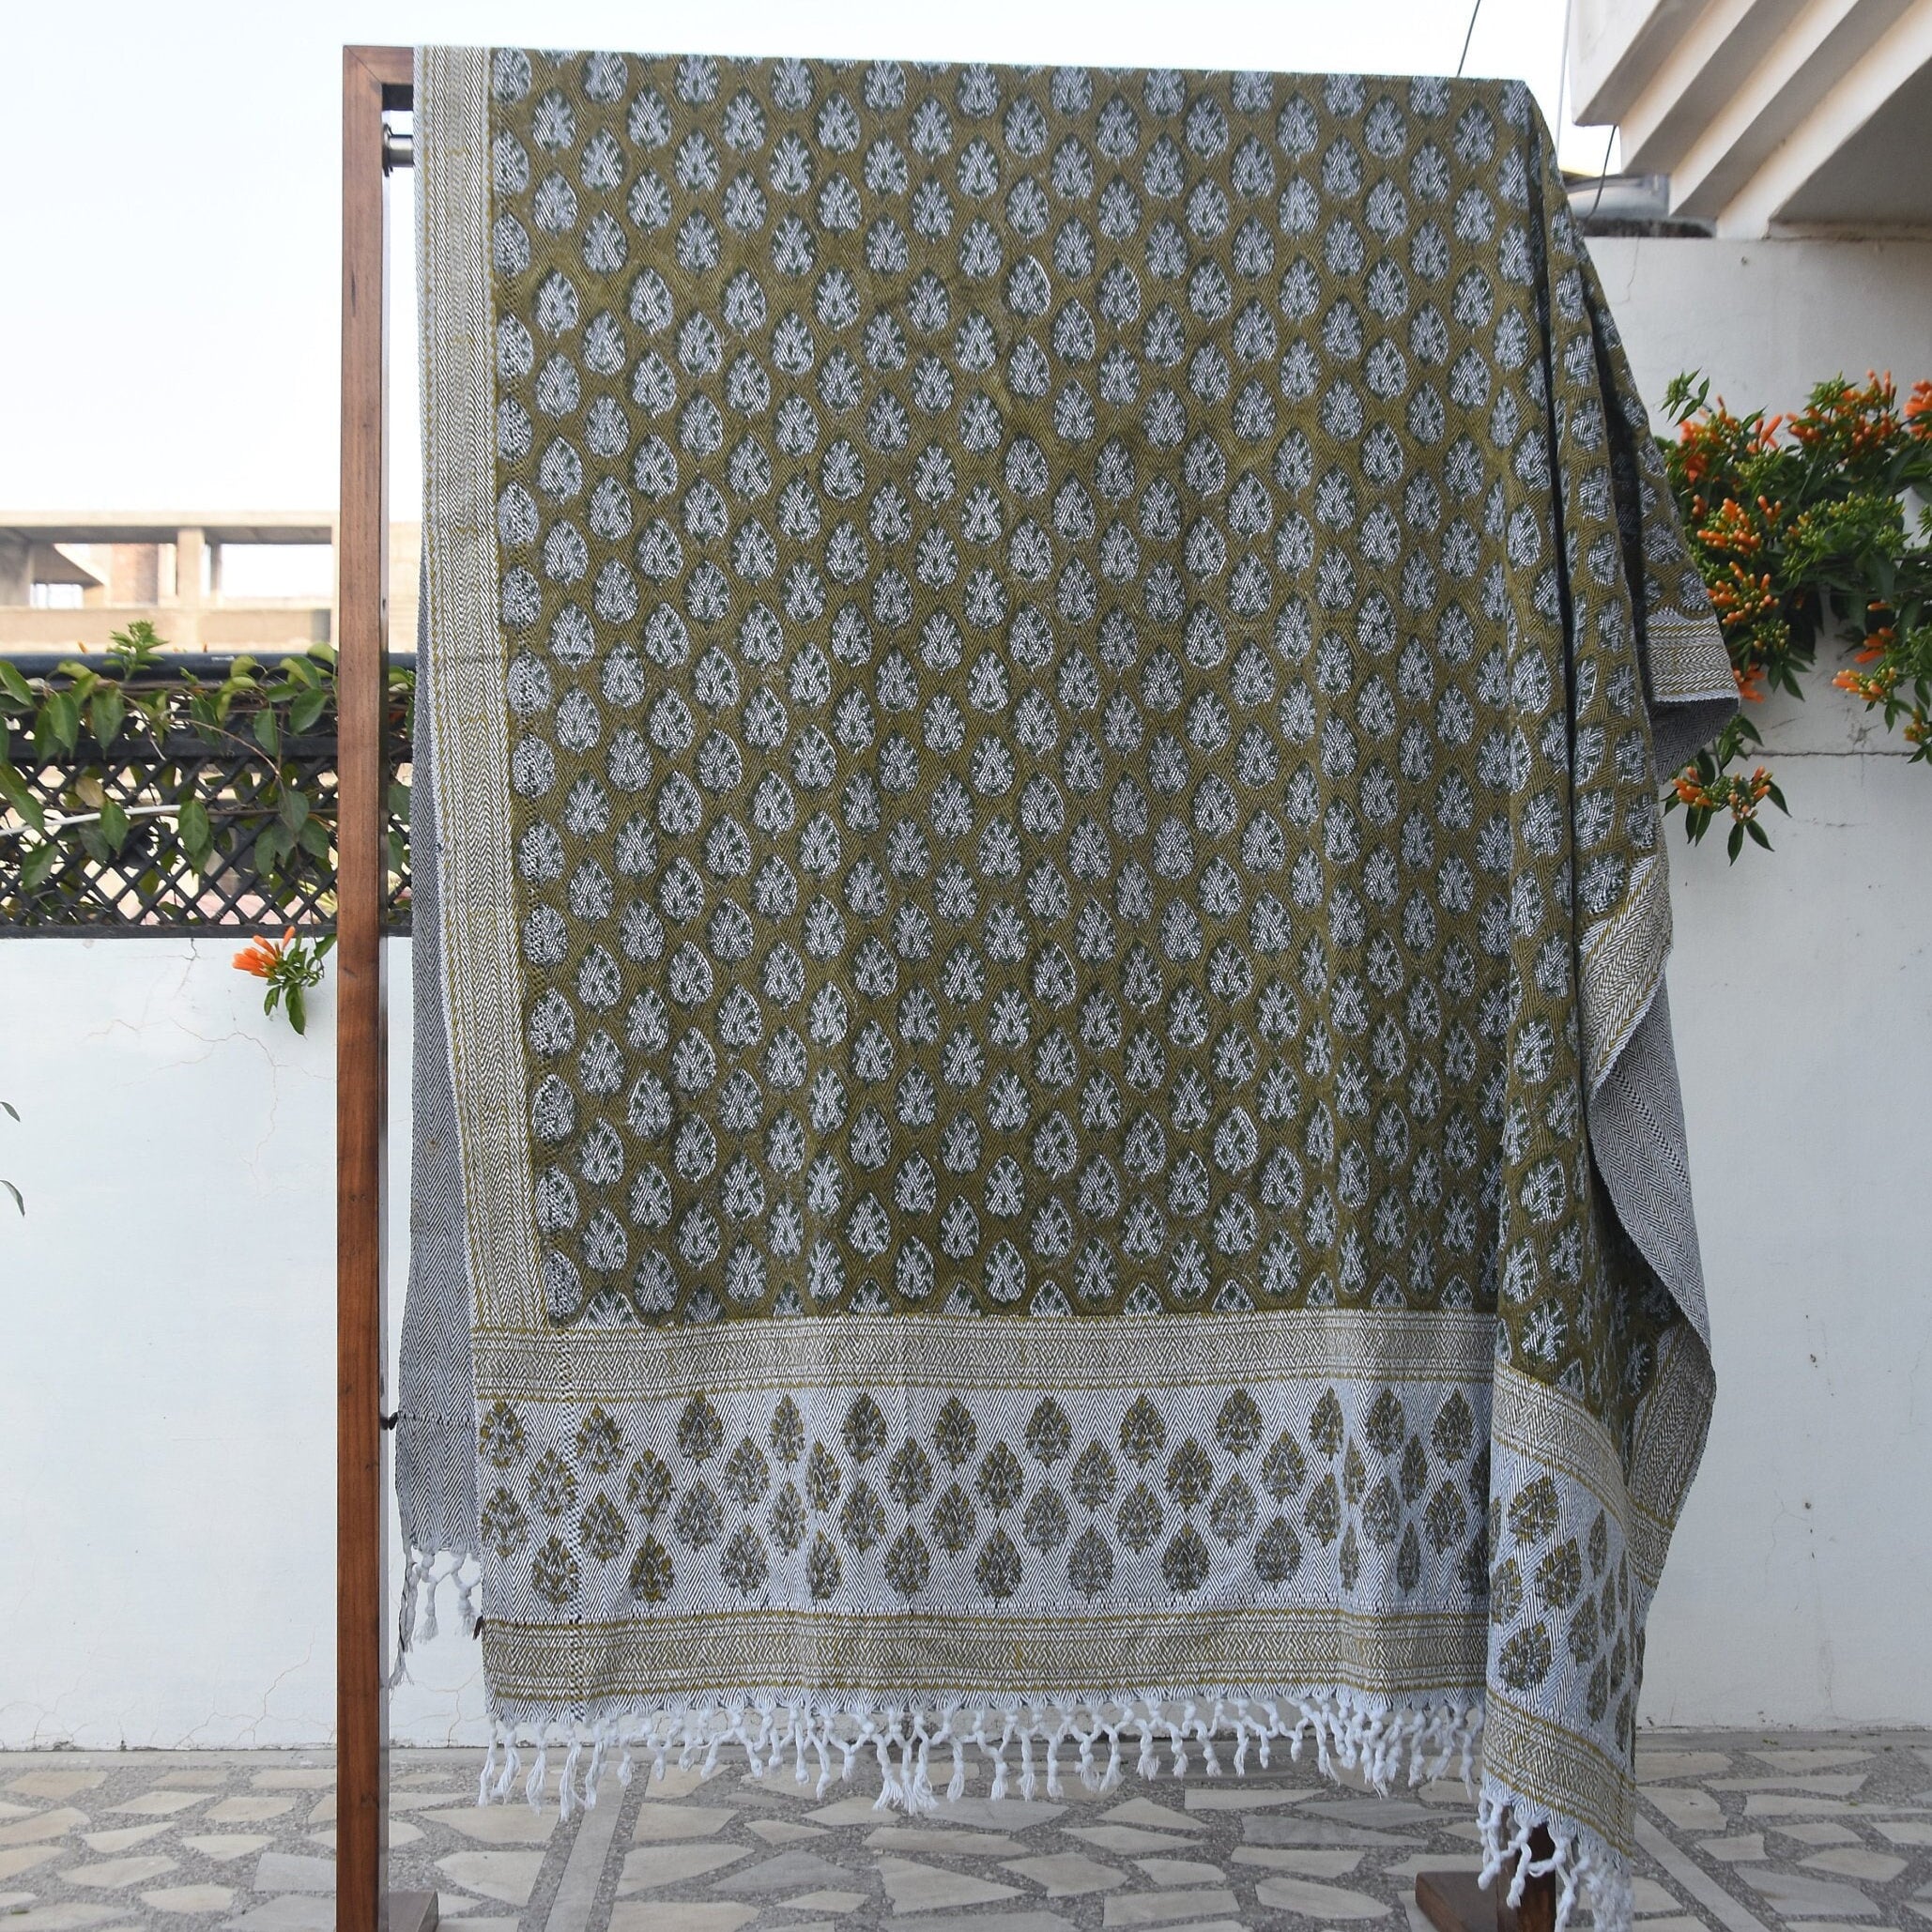 Throws Handwoven Block Print, blankets and throws, Handmade print throw for sofa, handwoven handloom fabric - BETAL LEAF